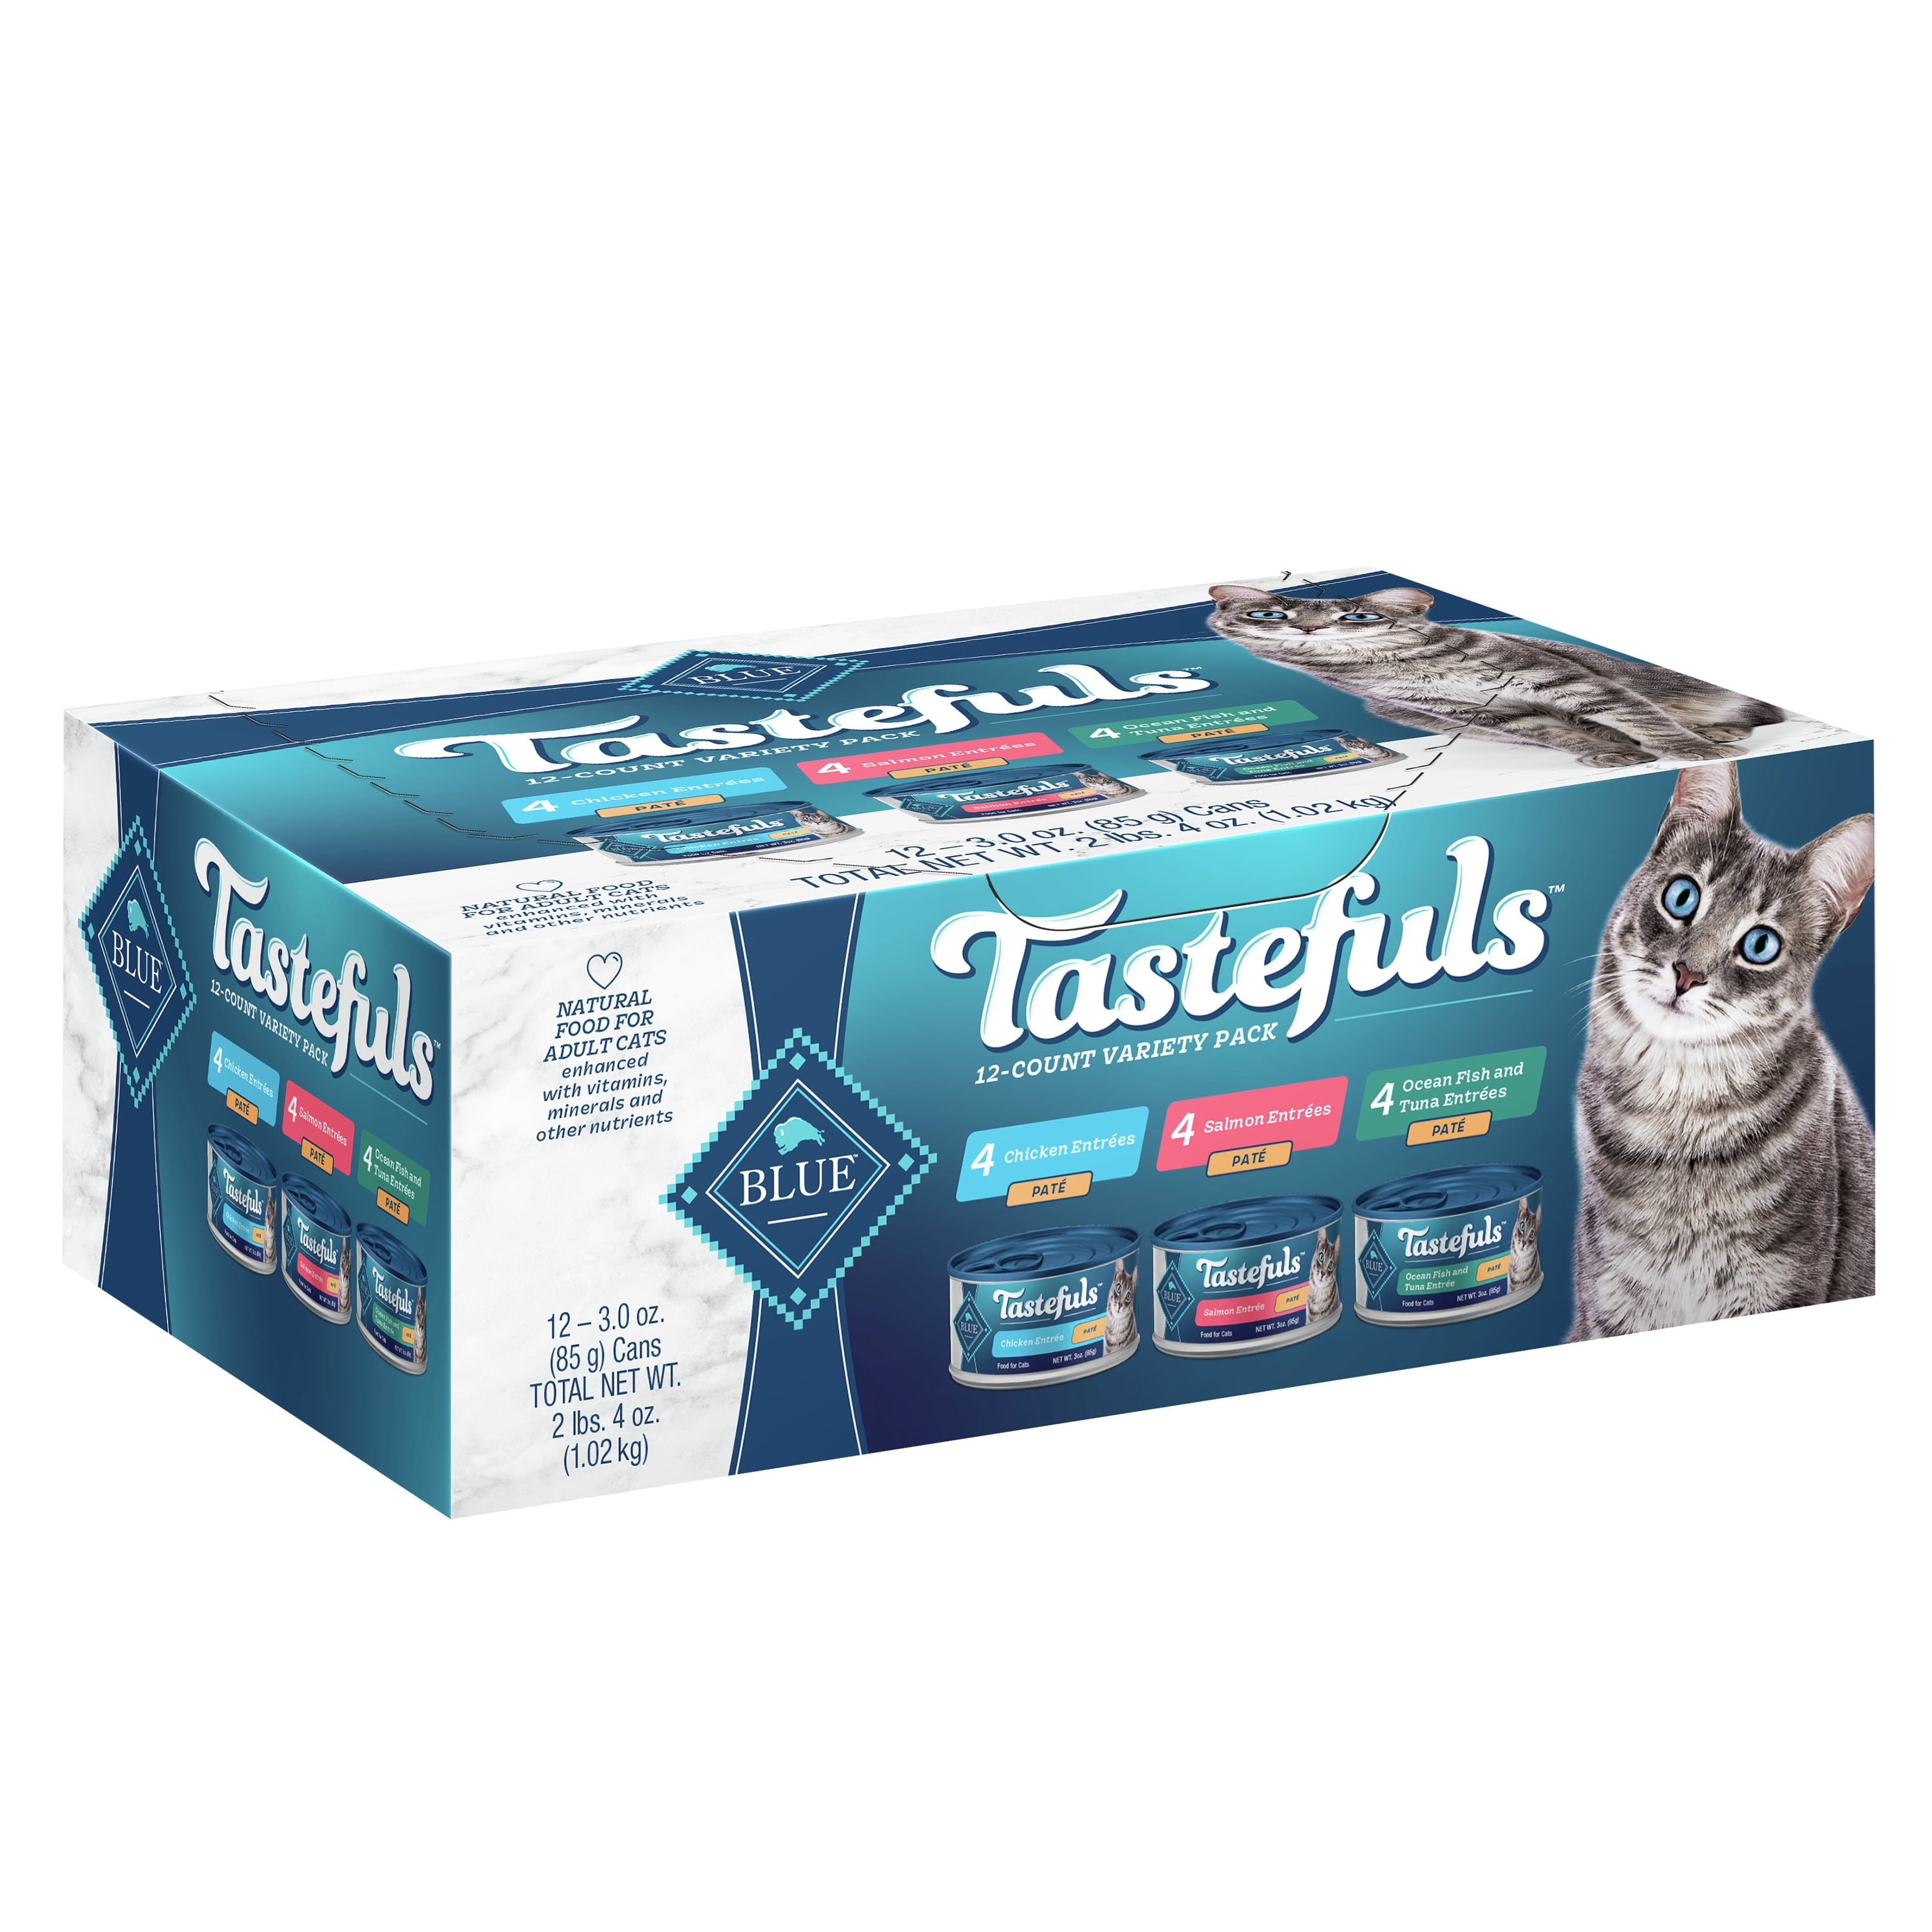 Blue Buffalo Tastefuls Salmon, Chicken, & Ocean Fish and Tuna Pate Wet Cat Food Variety Pack for Adult Cats, 3 oz. Cans (12 Pack)